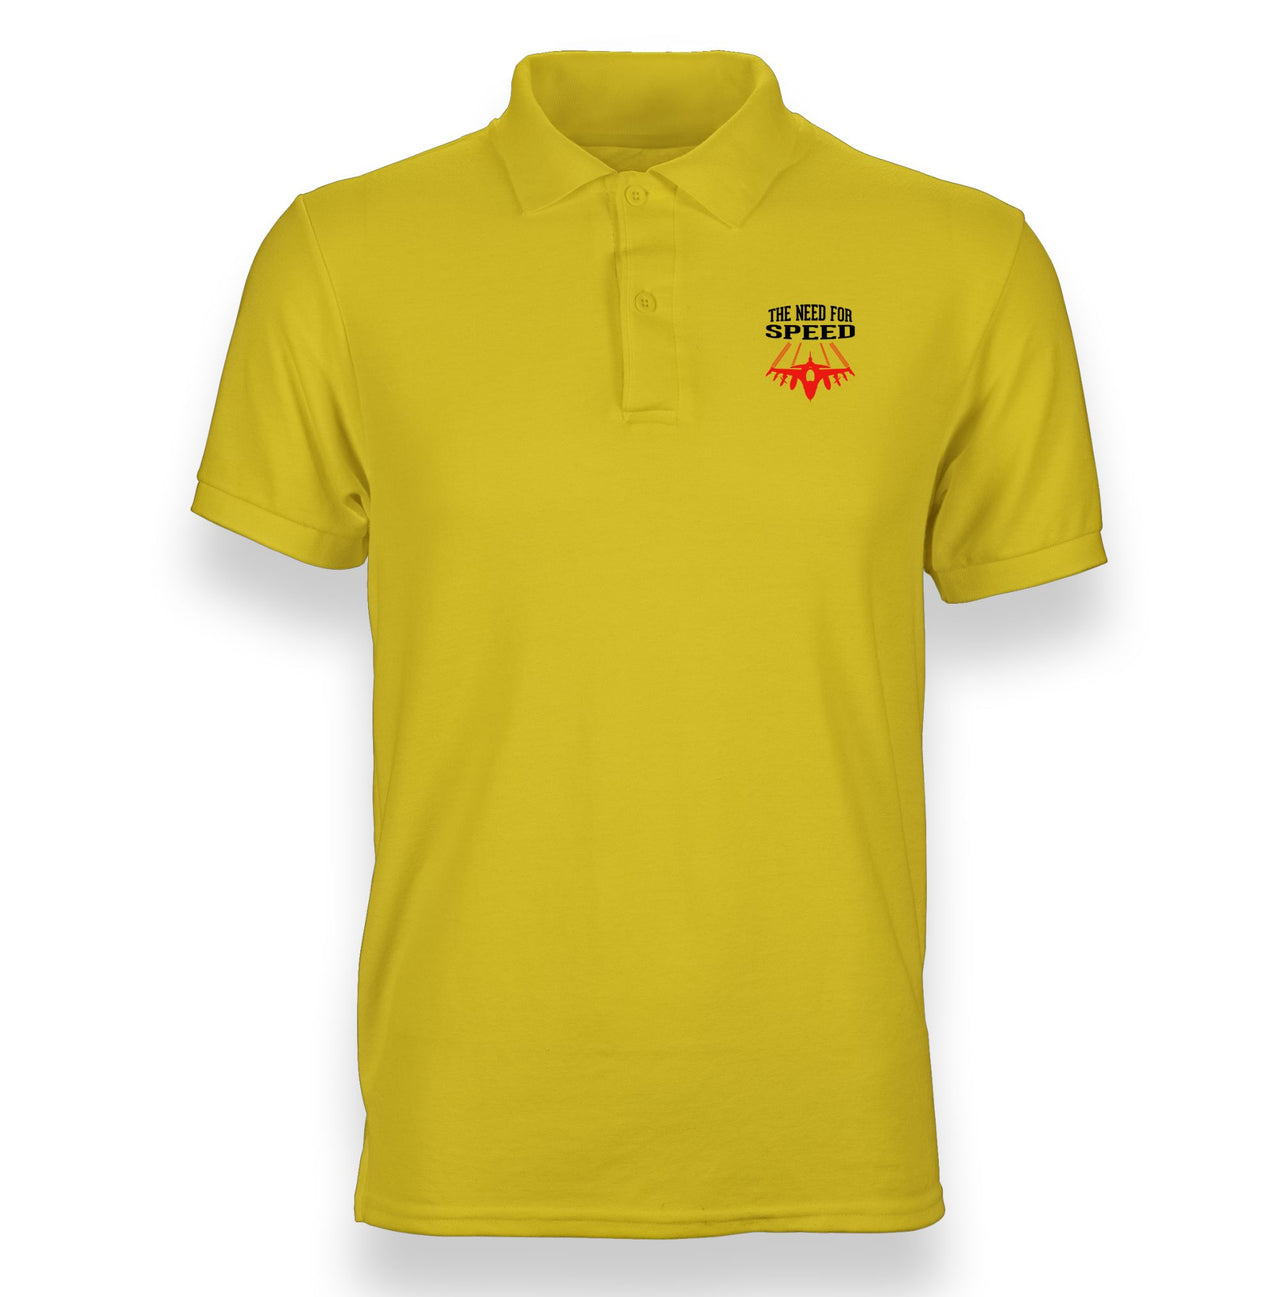 The Need For Speed Designed "WOMEN" Polo T-Shirts